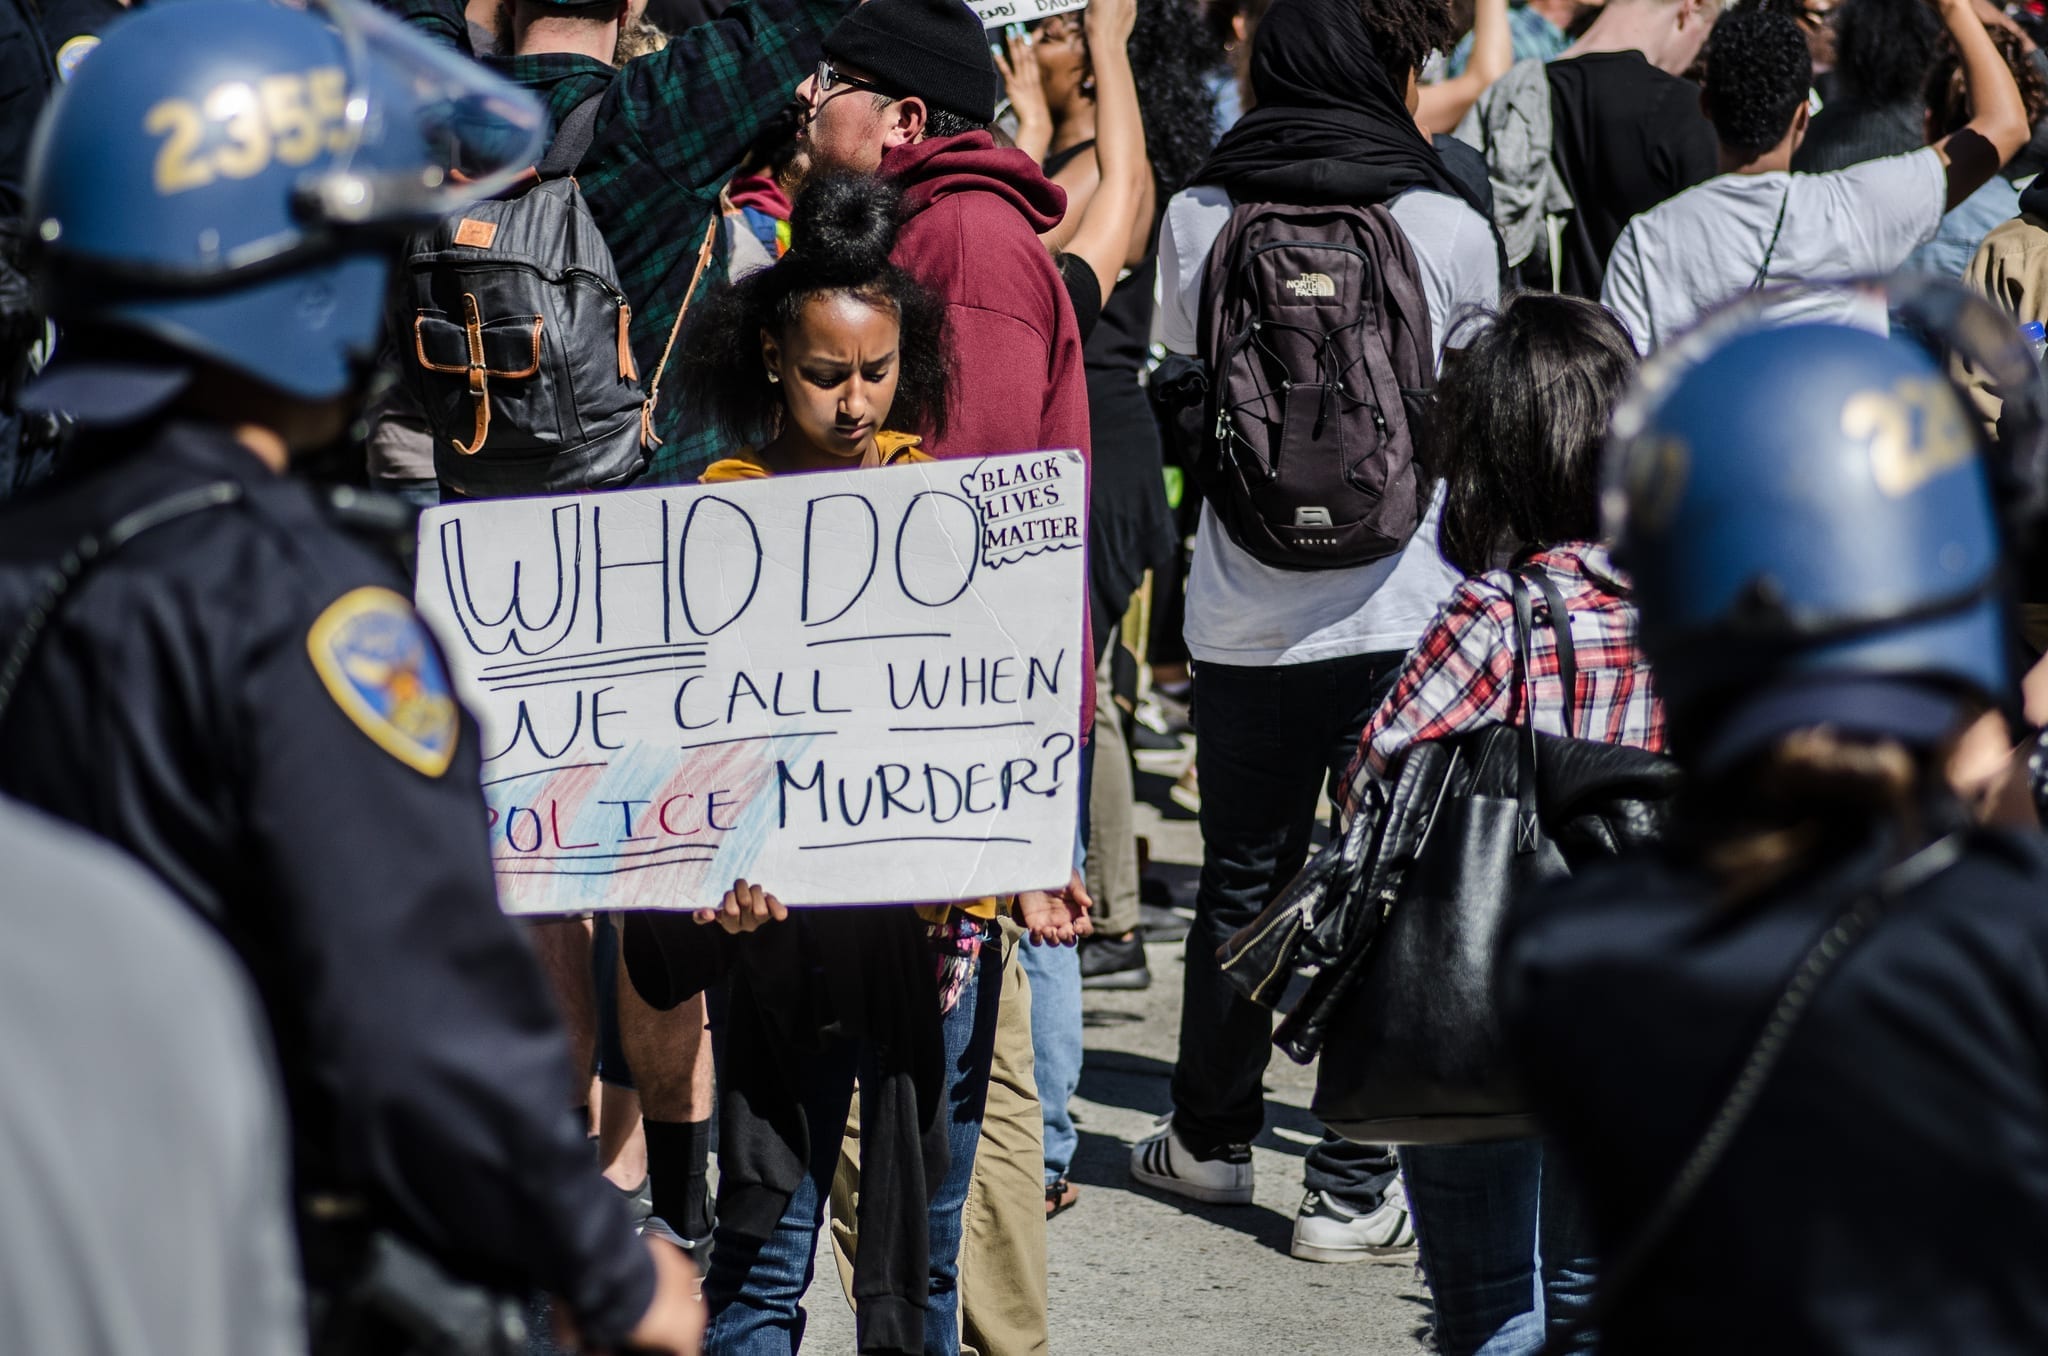 Black Lives Matter protest in San Francisco; image courtesy of Michelle Ursino, via Flickr, CC BY-SA 2.0, no changes made.